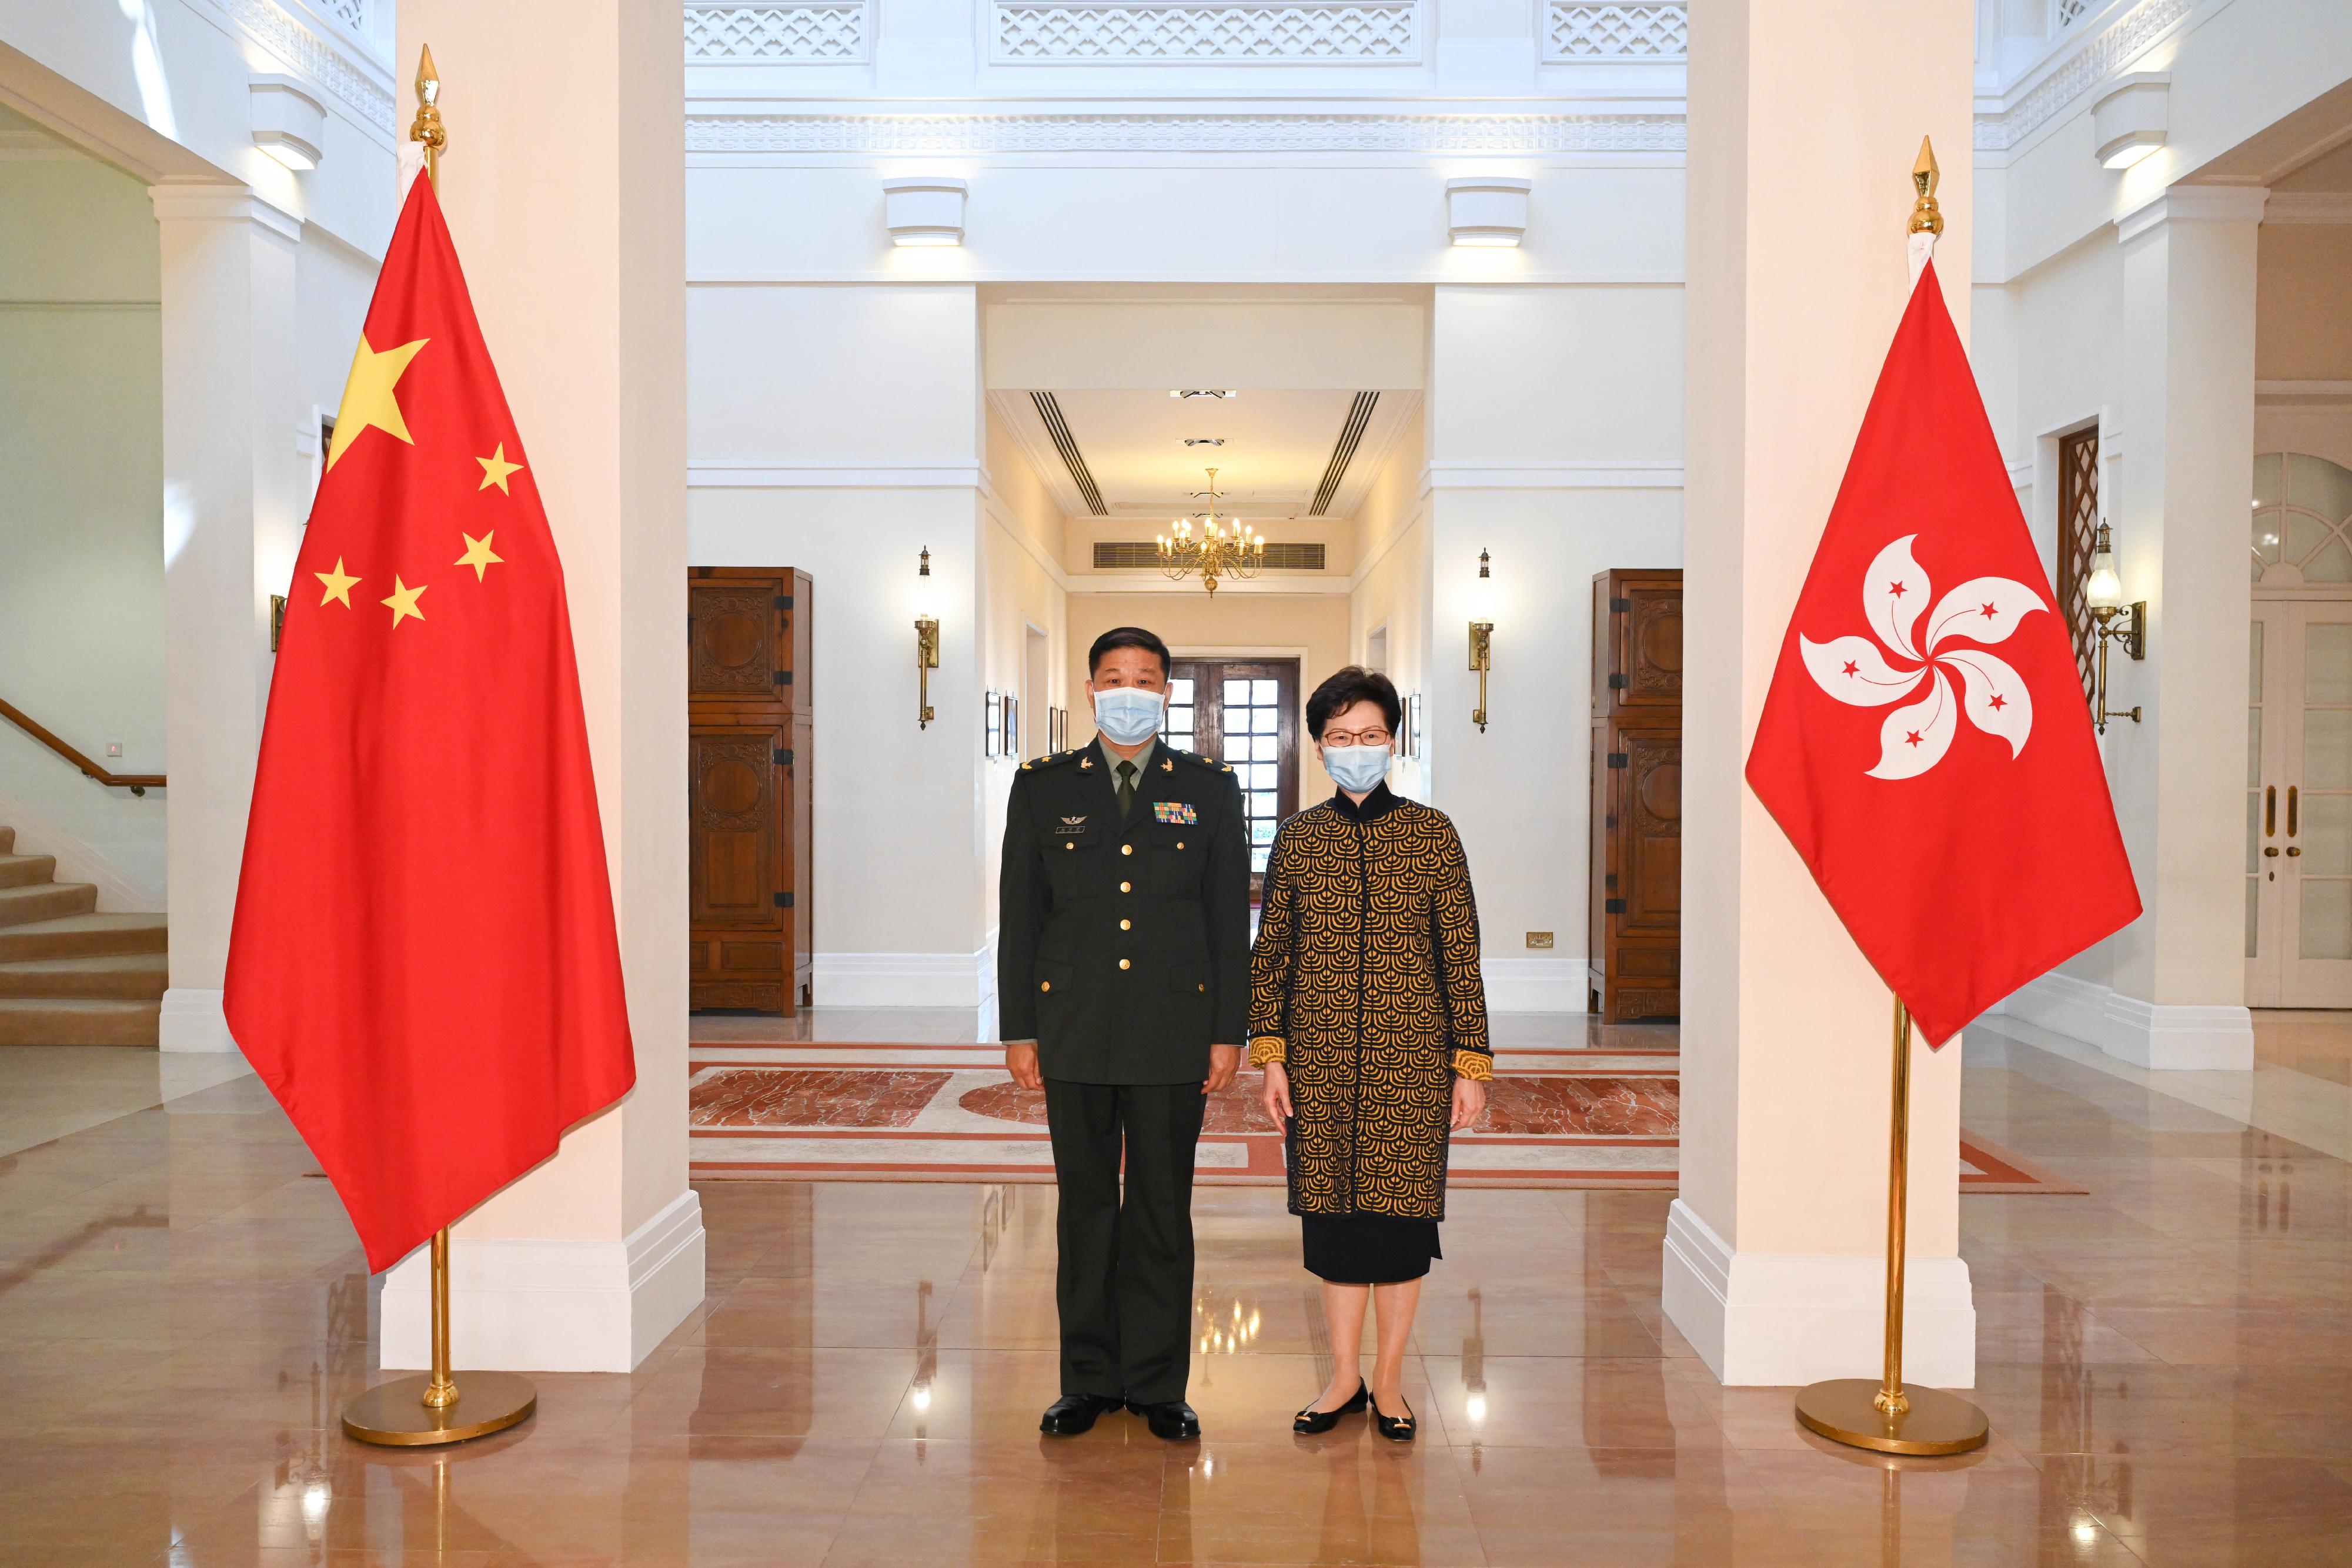 The Chief Executive, Mrs Carrie Lam (right), meets the Commander-in-chief of the Chinese People's Liberation Army Hong Kong Garrison, Major General Peng Jingtang (left), at Government House this morning (January 10).